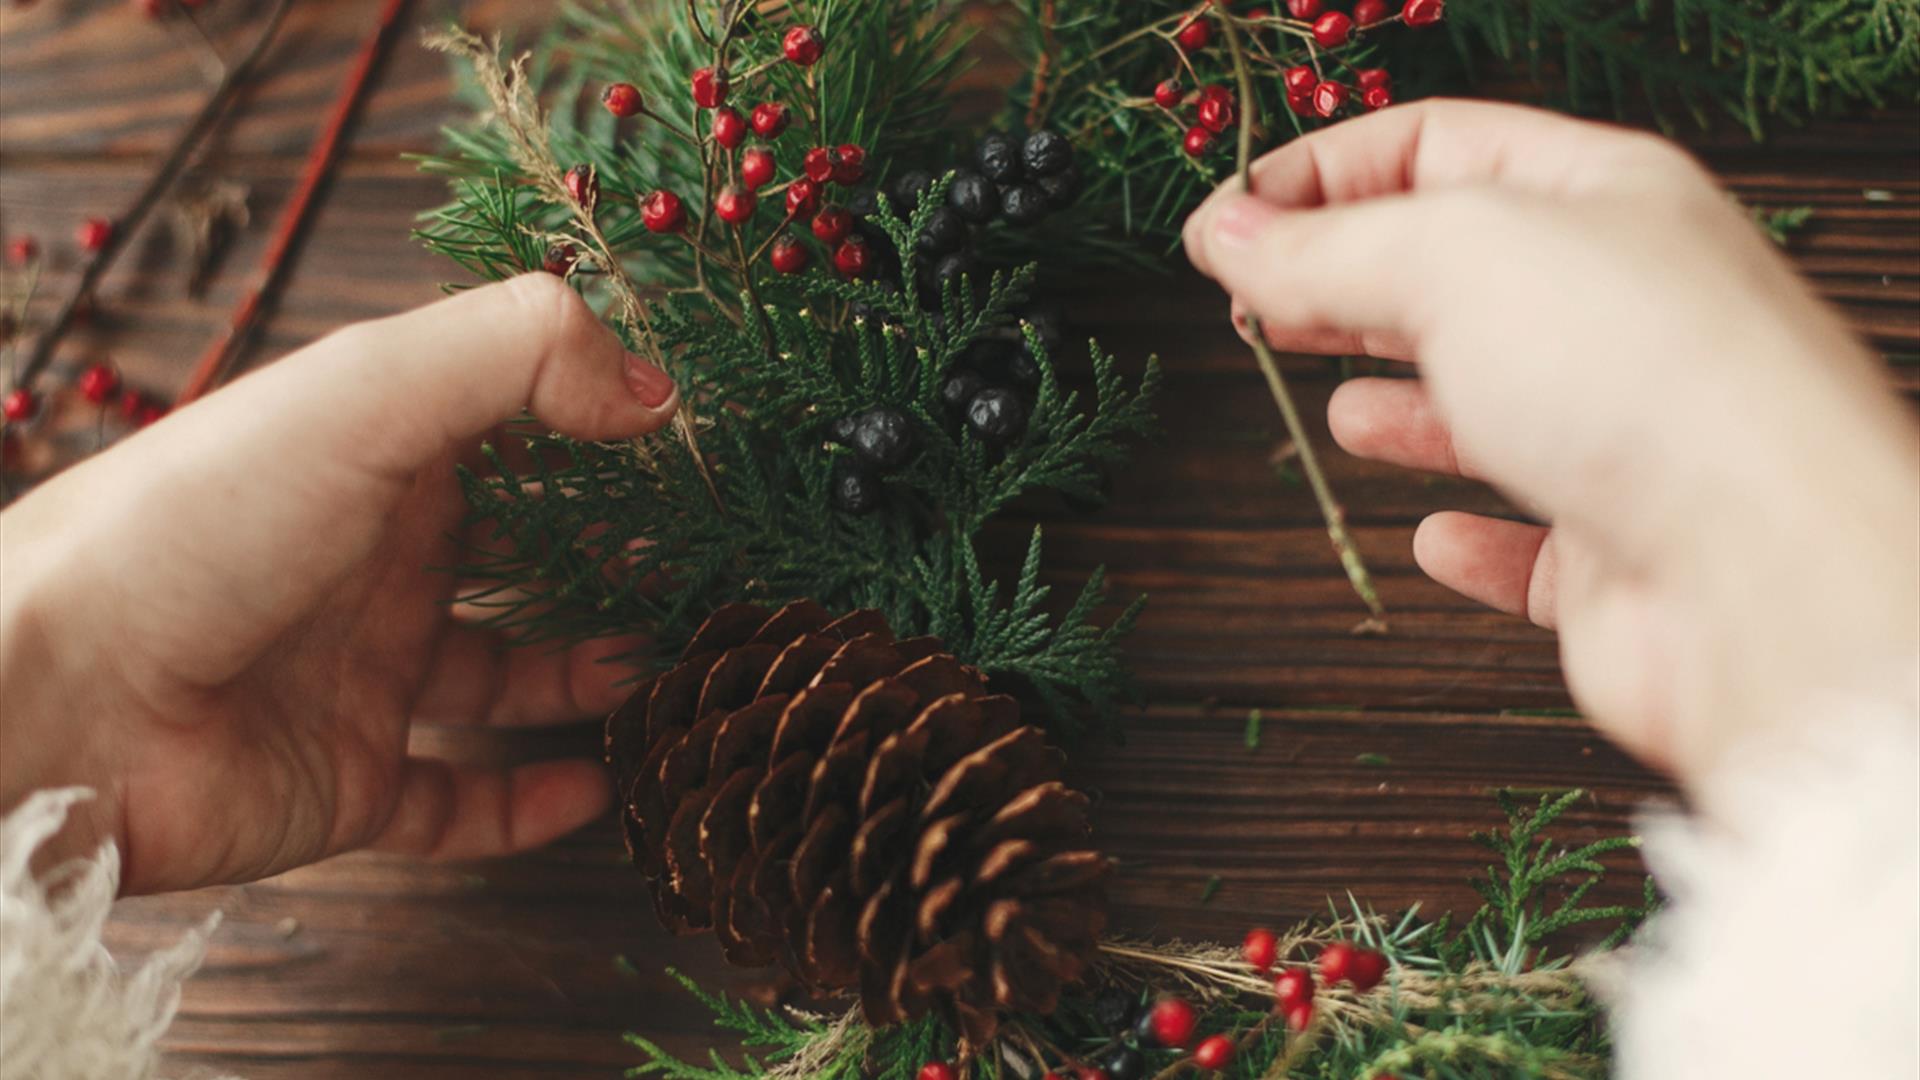 hands crafting a pine wreath